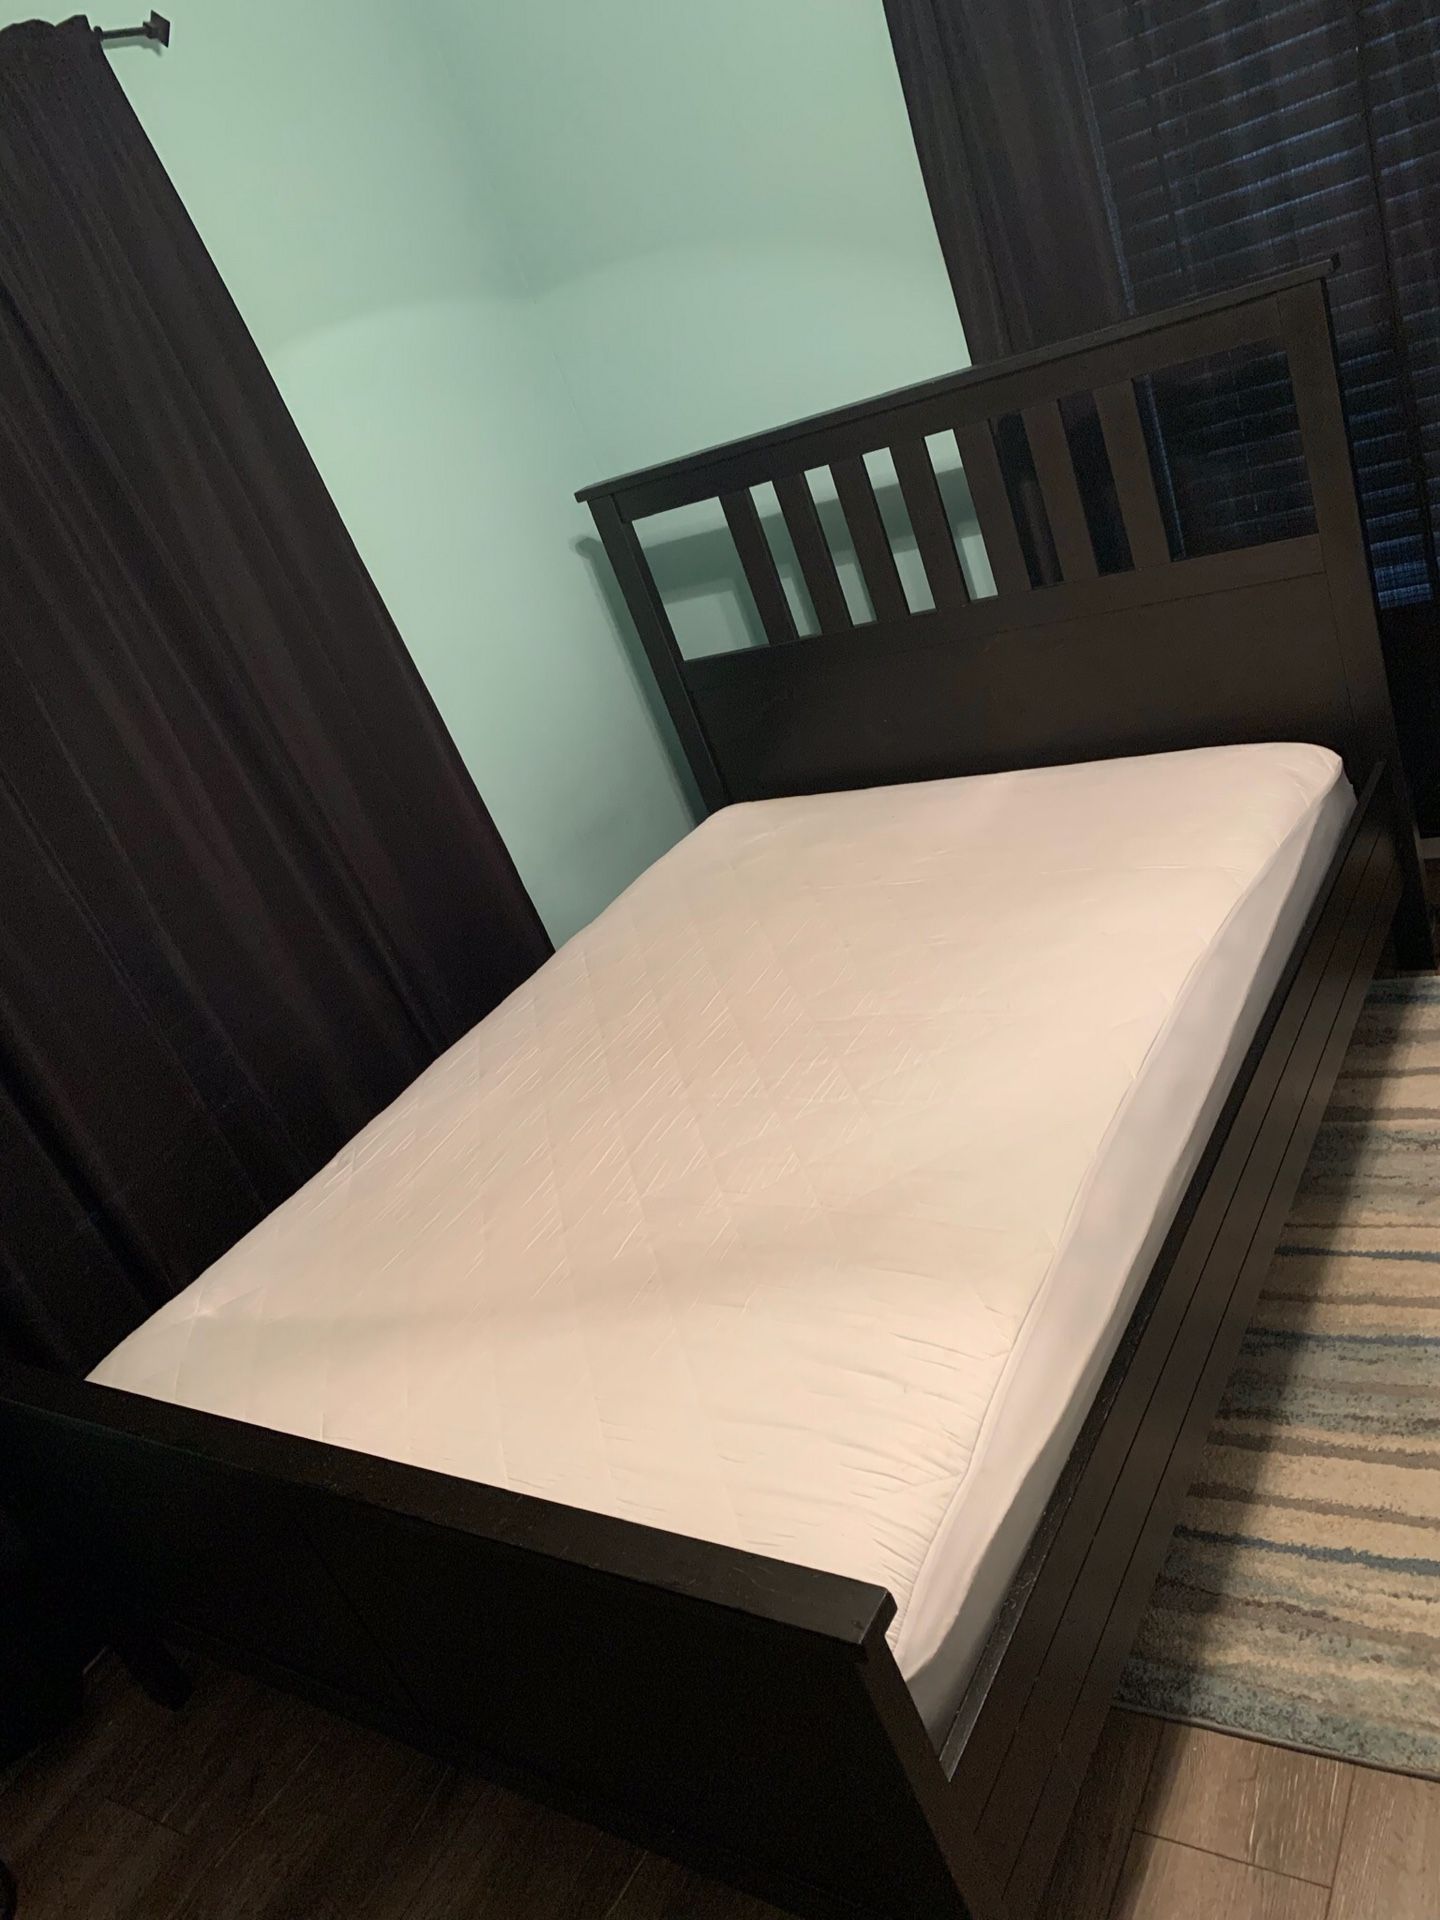 IKEA bedroom set with full size mattress in a good shape,clean